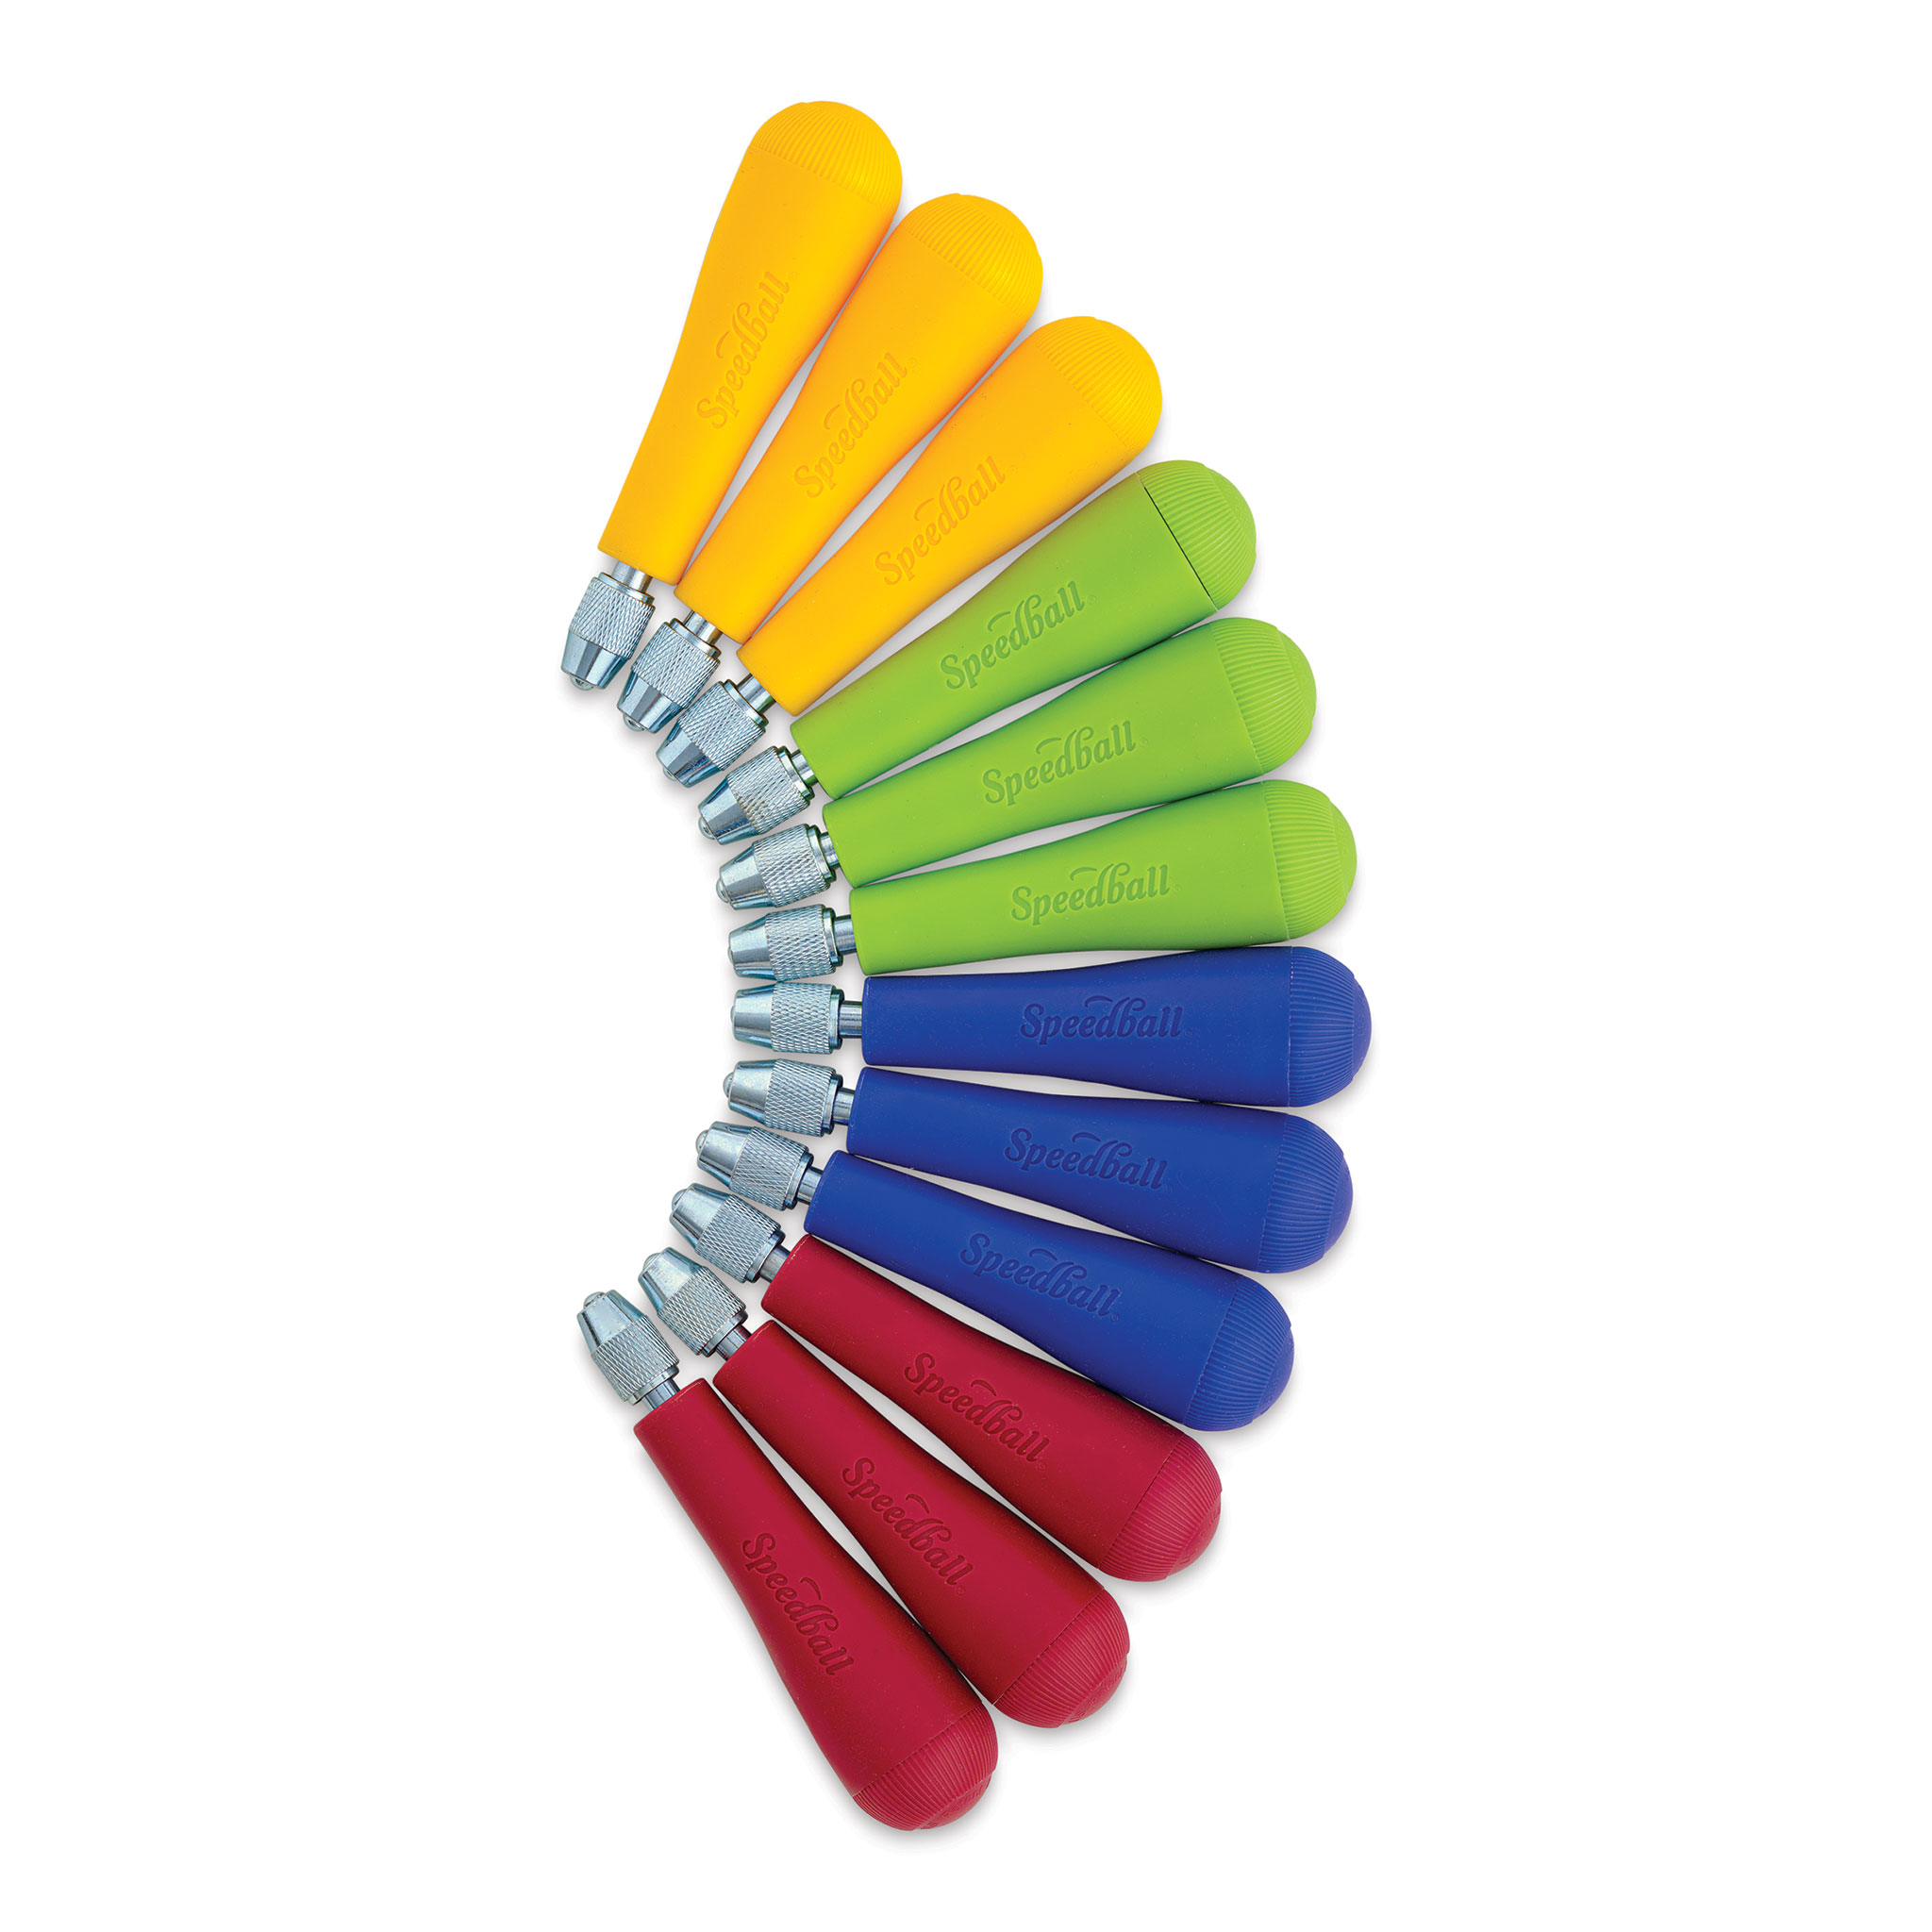 Speedball Cutter Handle with Screw-Off Cap, Assorted Color, Pack of 12